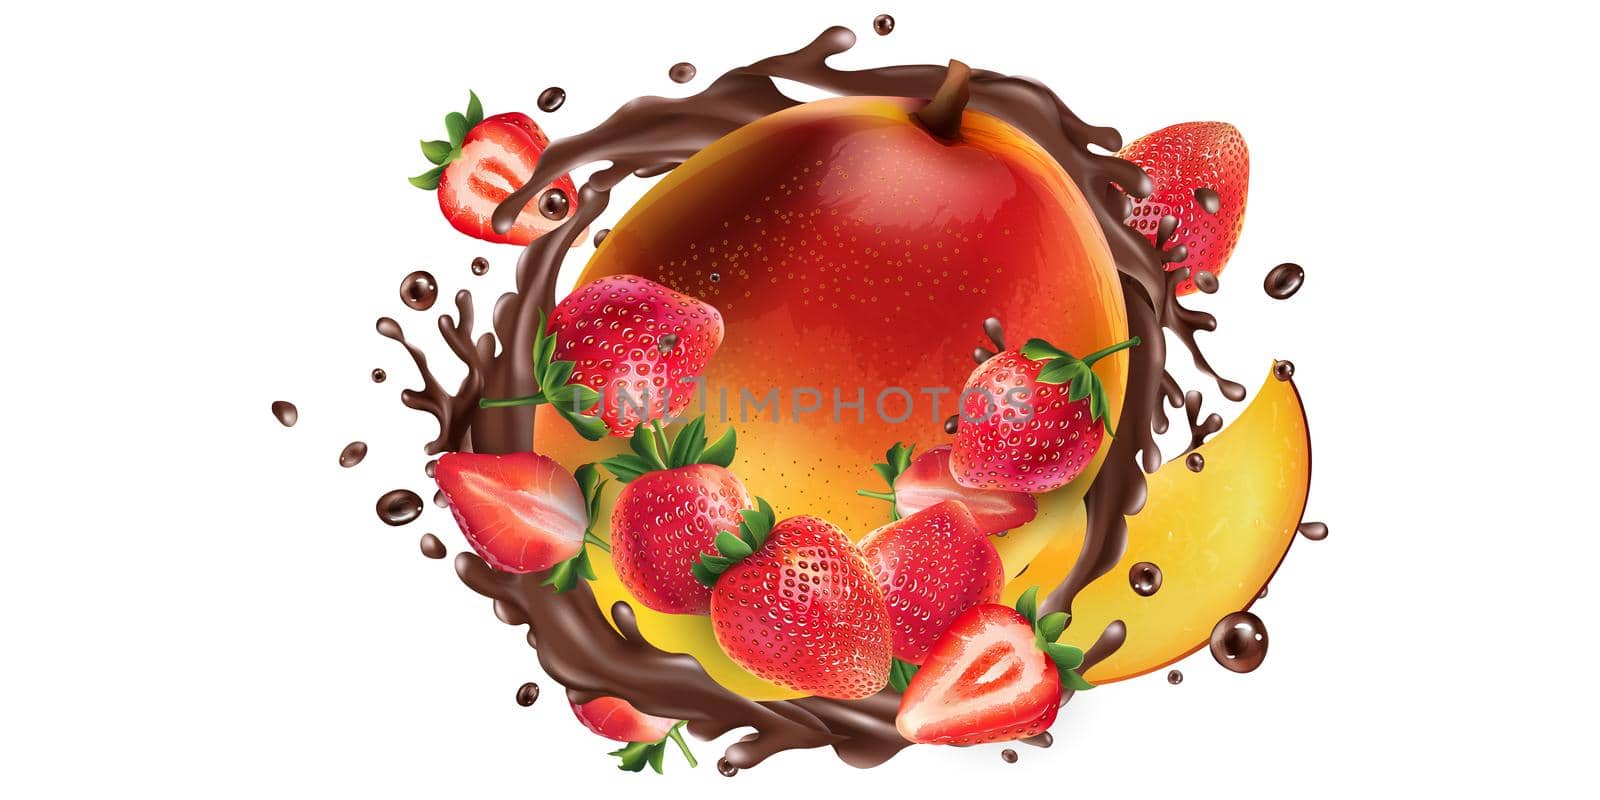 Fresh mango with strawberries and a splash of liquid chocolate on a white background. Realistic style illustration.